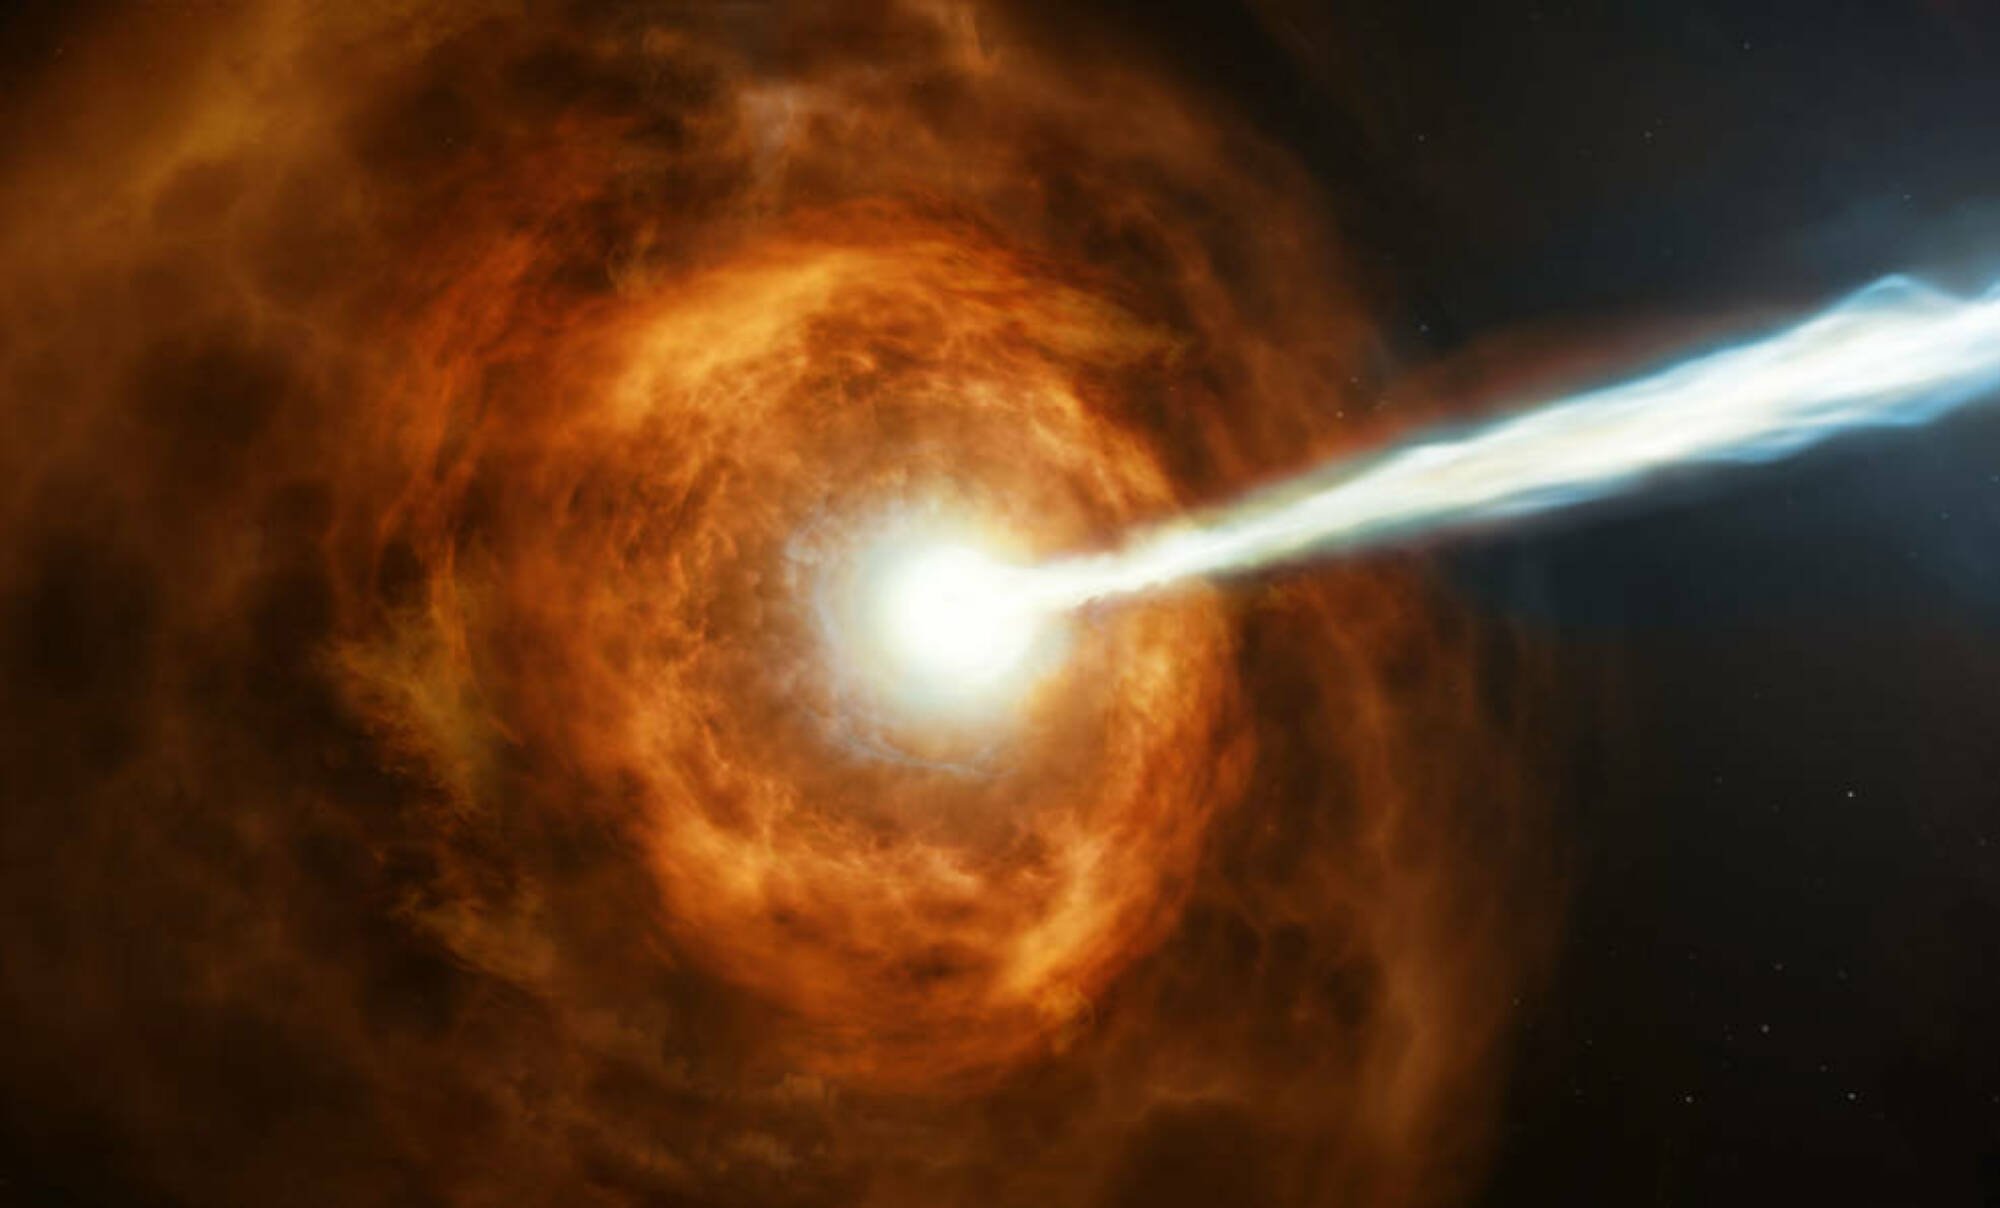 artist's conception of a Gamma-ray burst from an exploded star